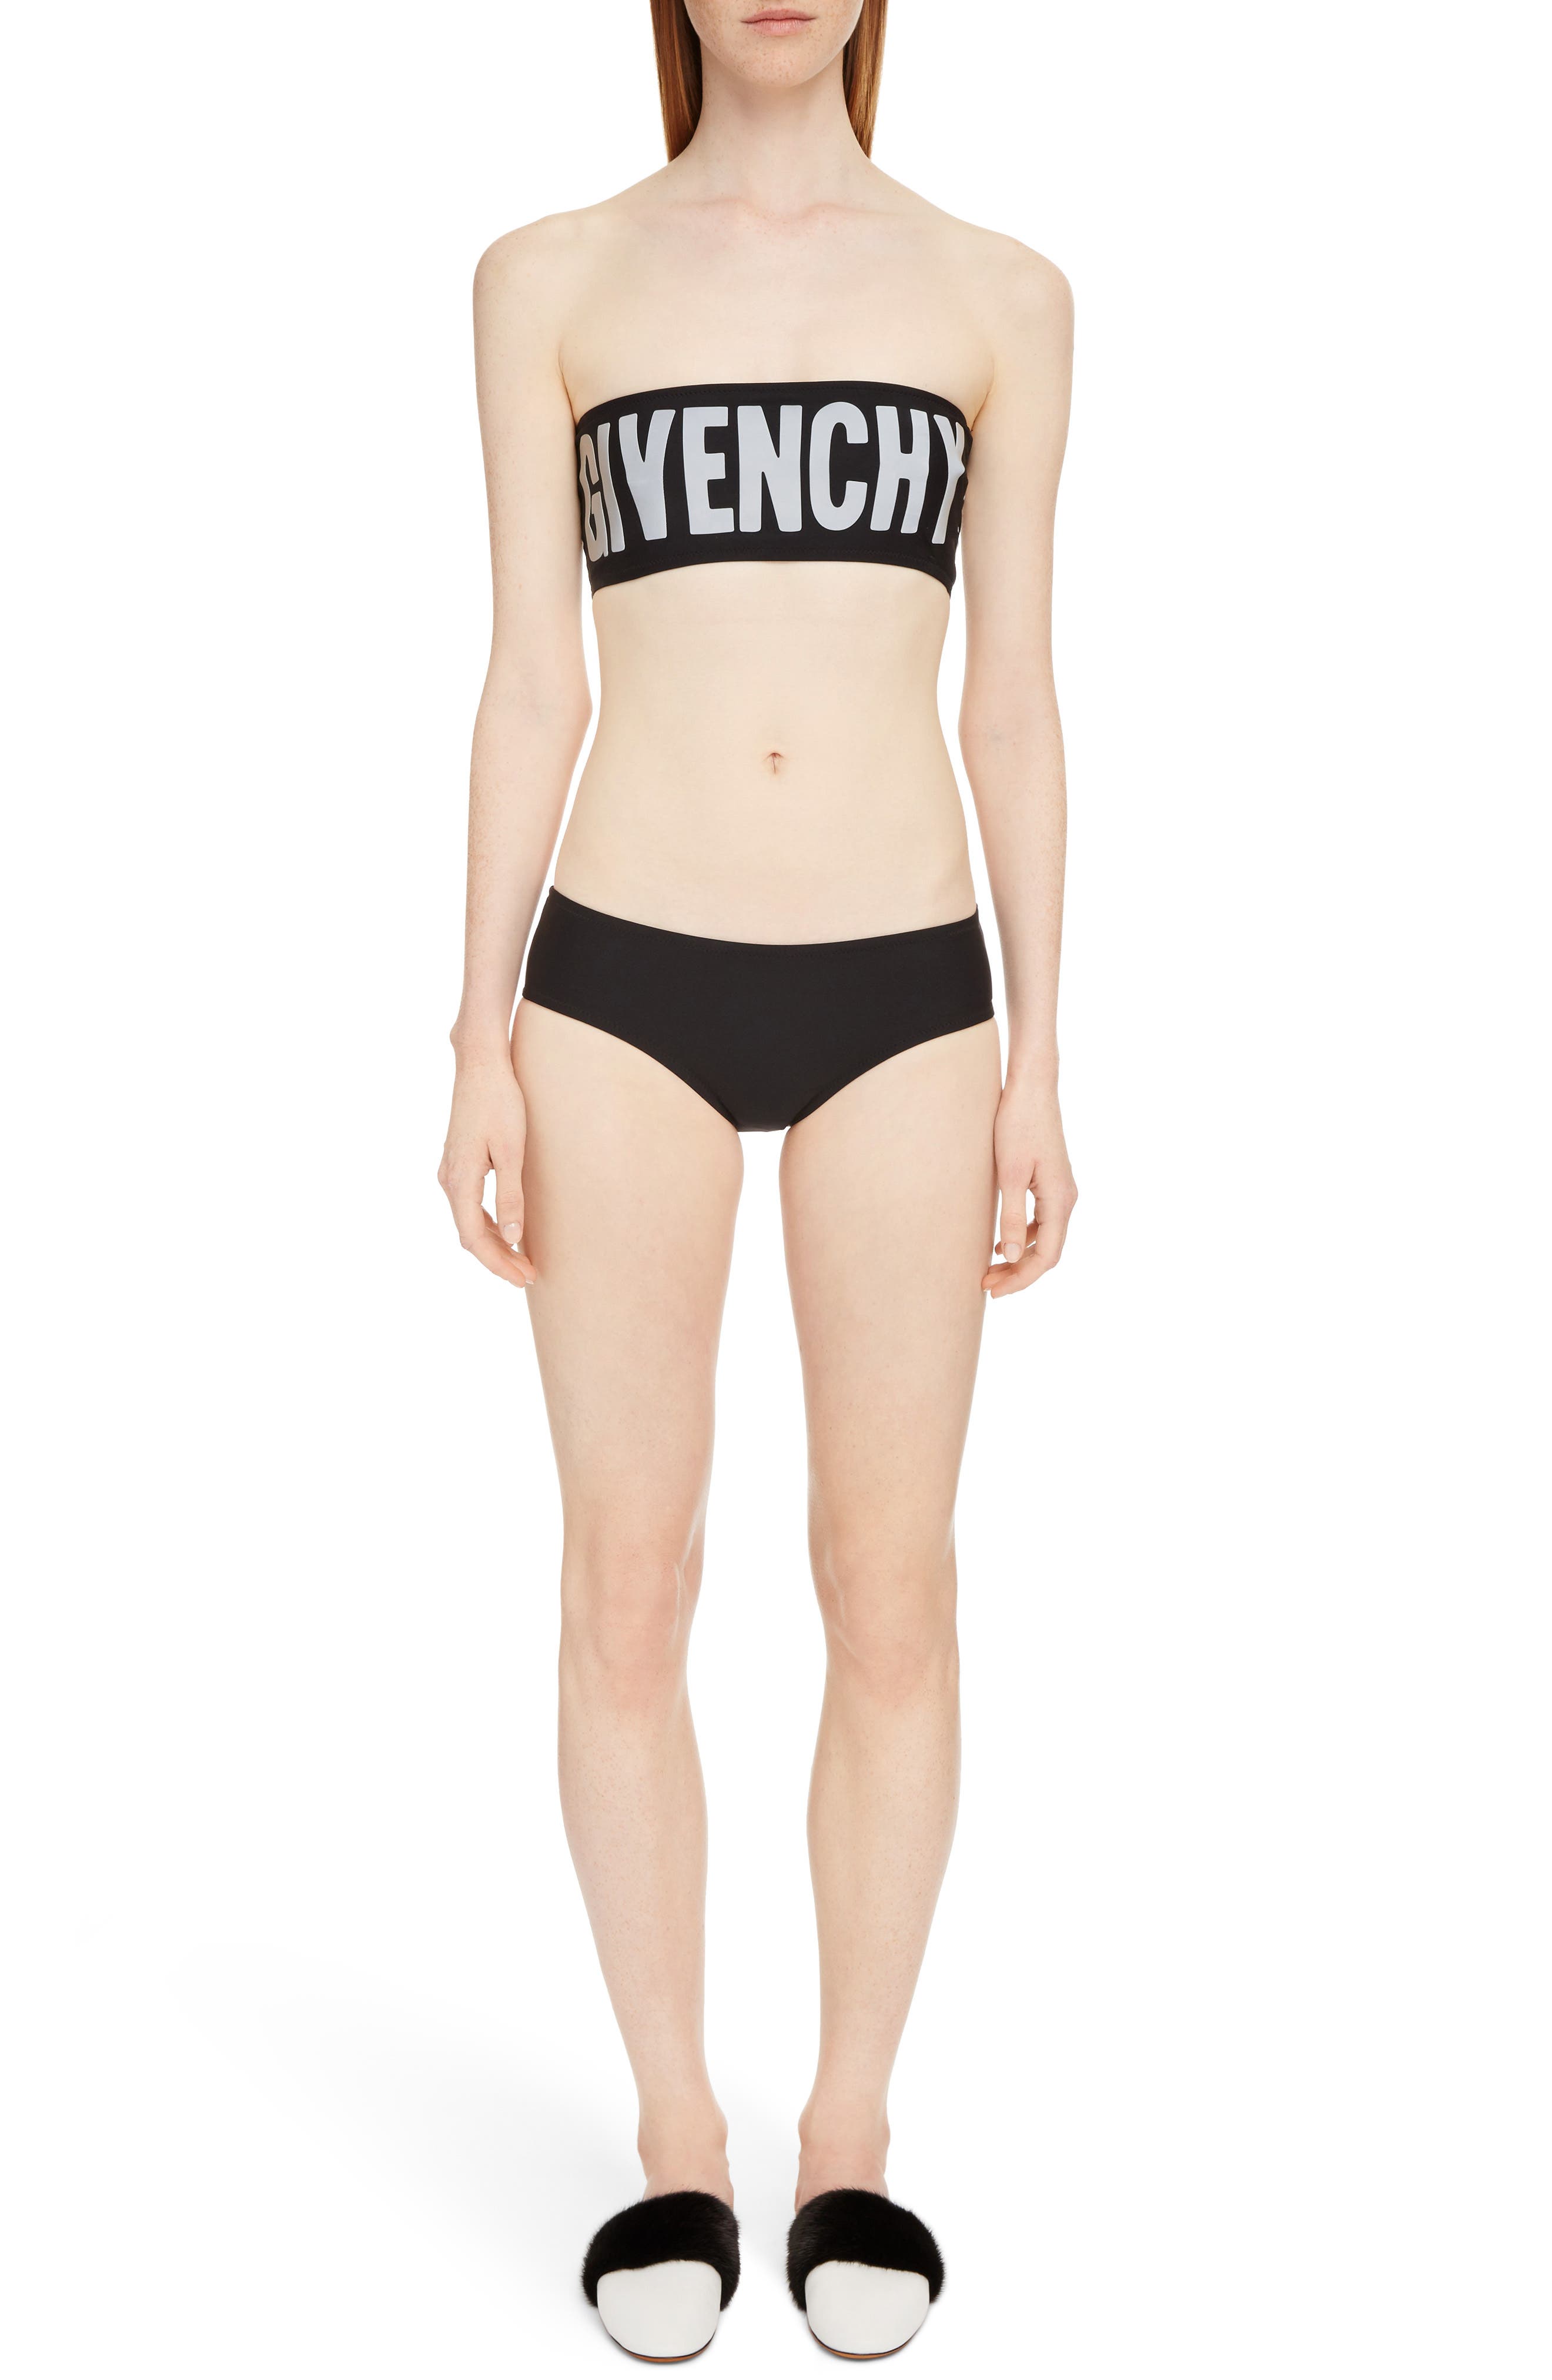 givenchy bathing suit two piece